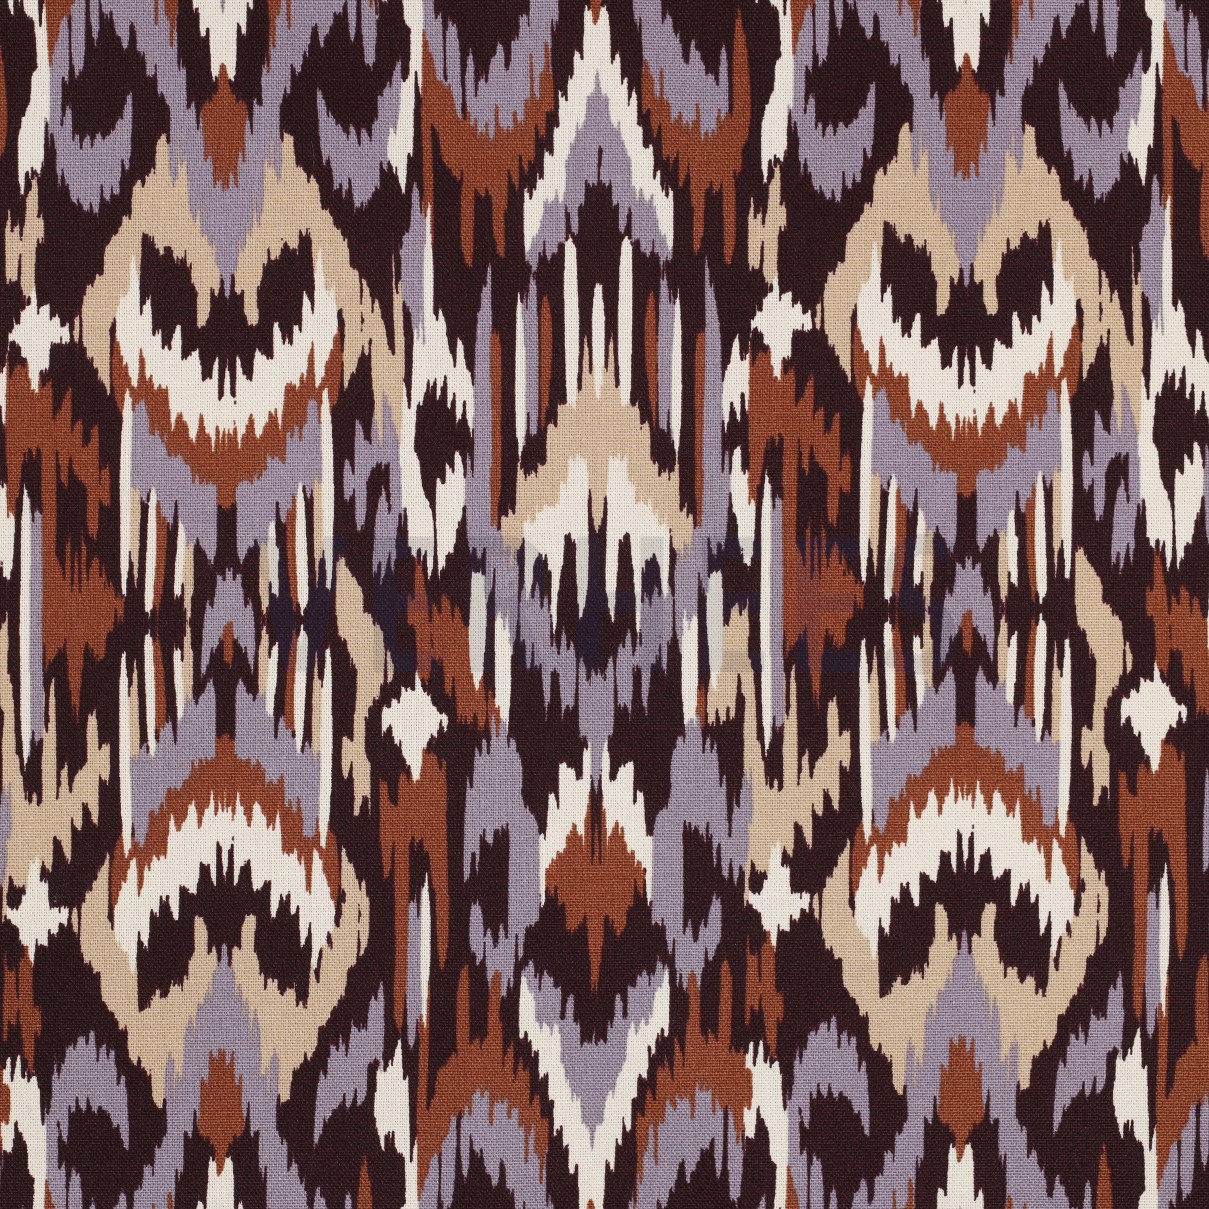 CANVAS ABSTRACT AUBERGINE (high resolution)